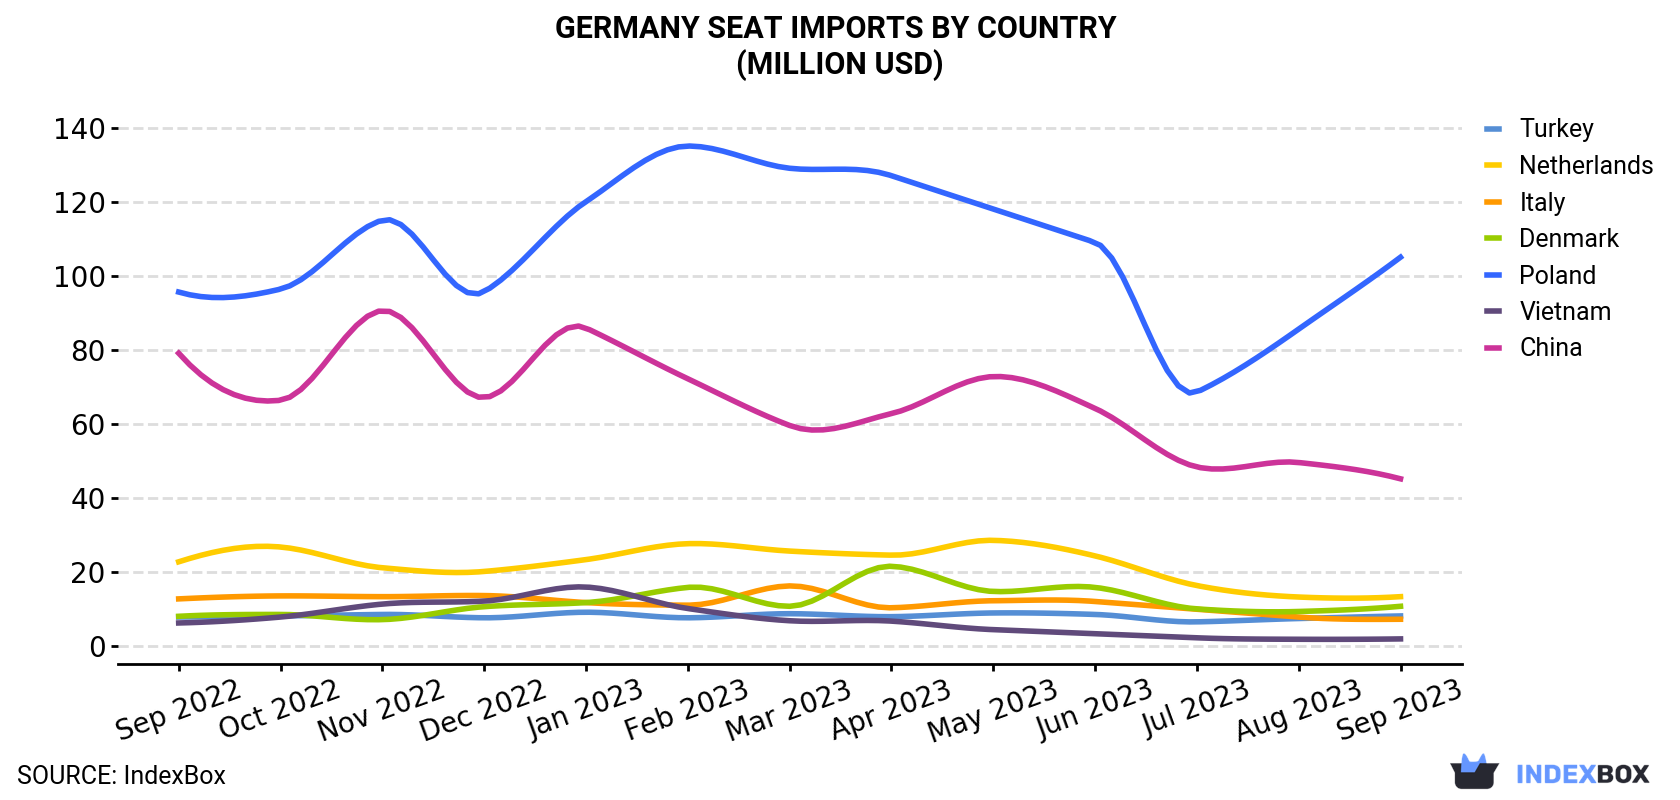 Germany Seat Imports By Country (Million USD)